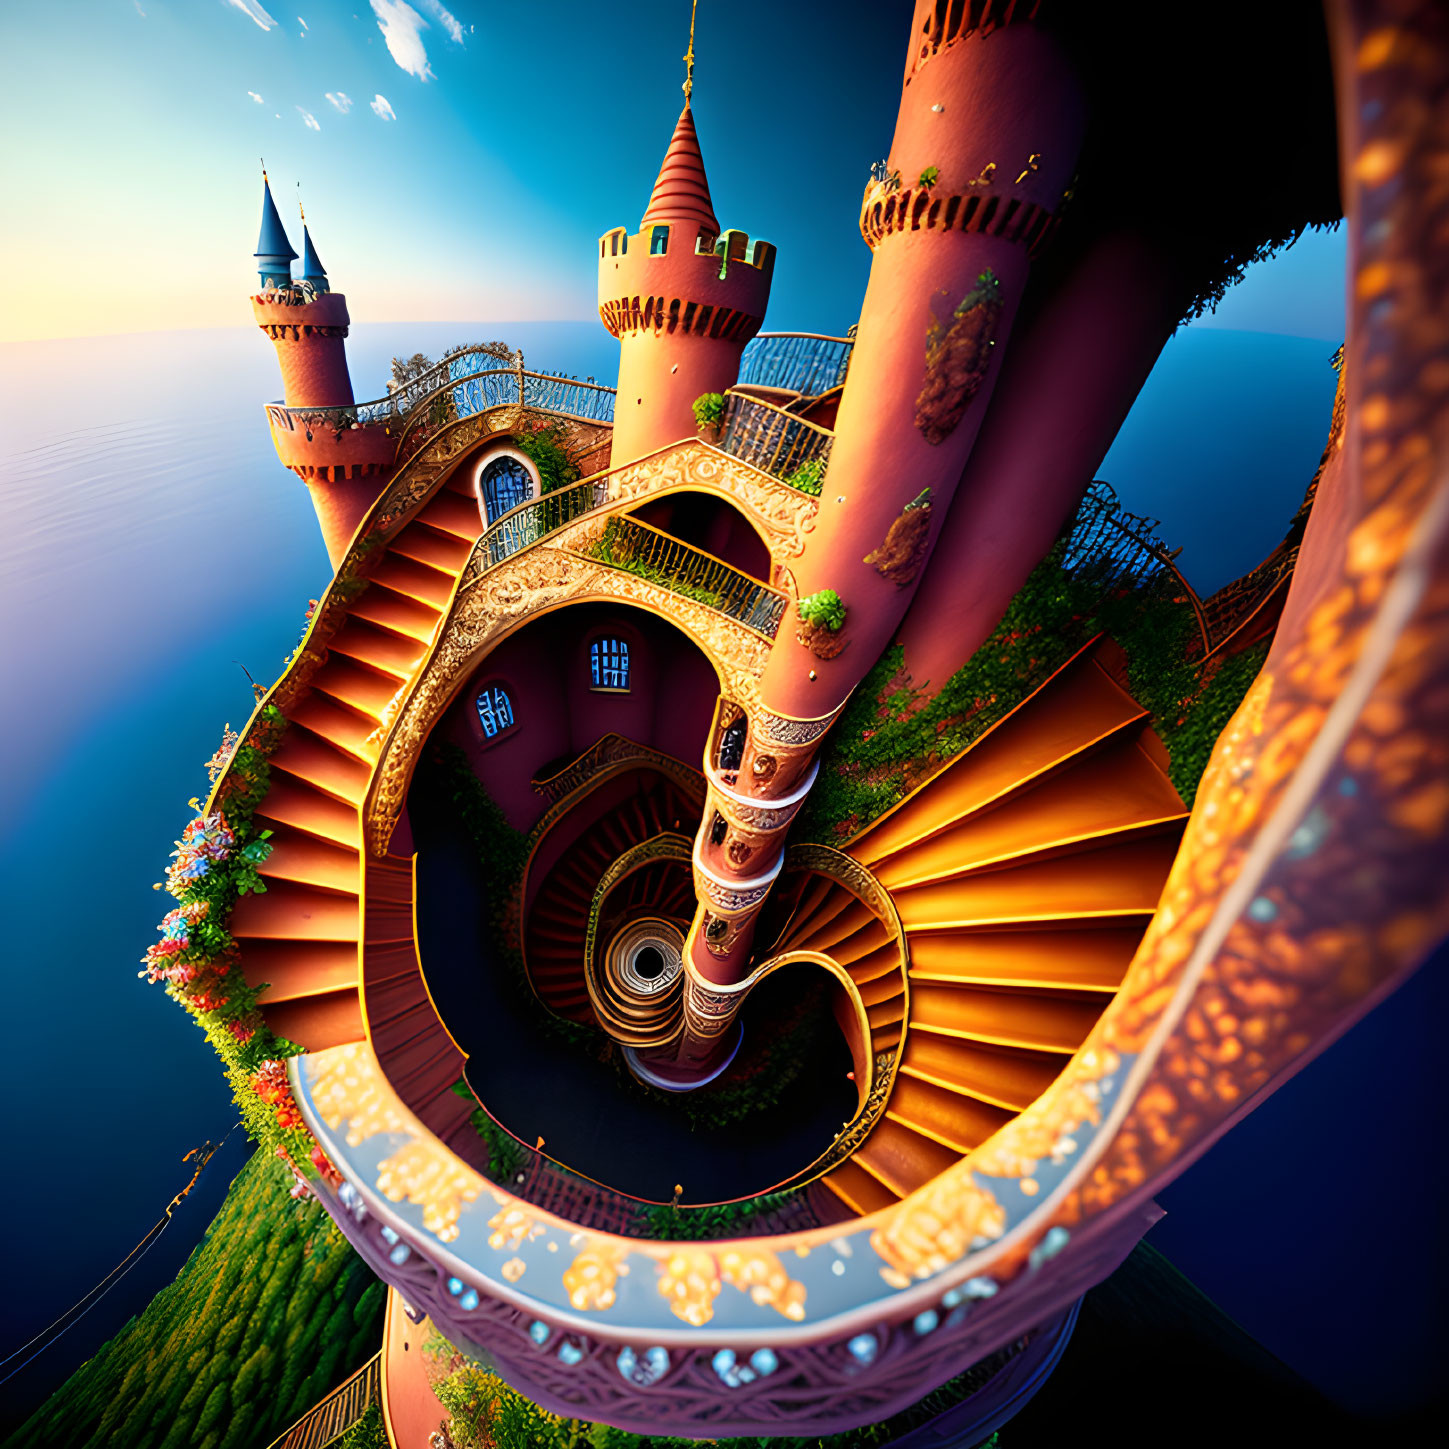 Whimsical spiraling castle tower with ornate details against sunset sky